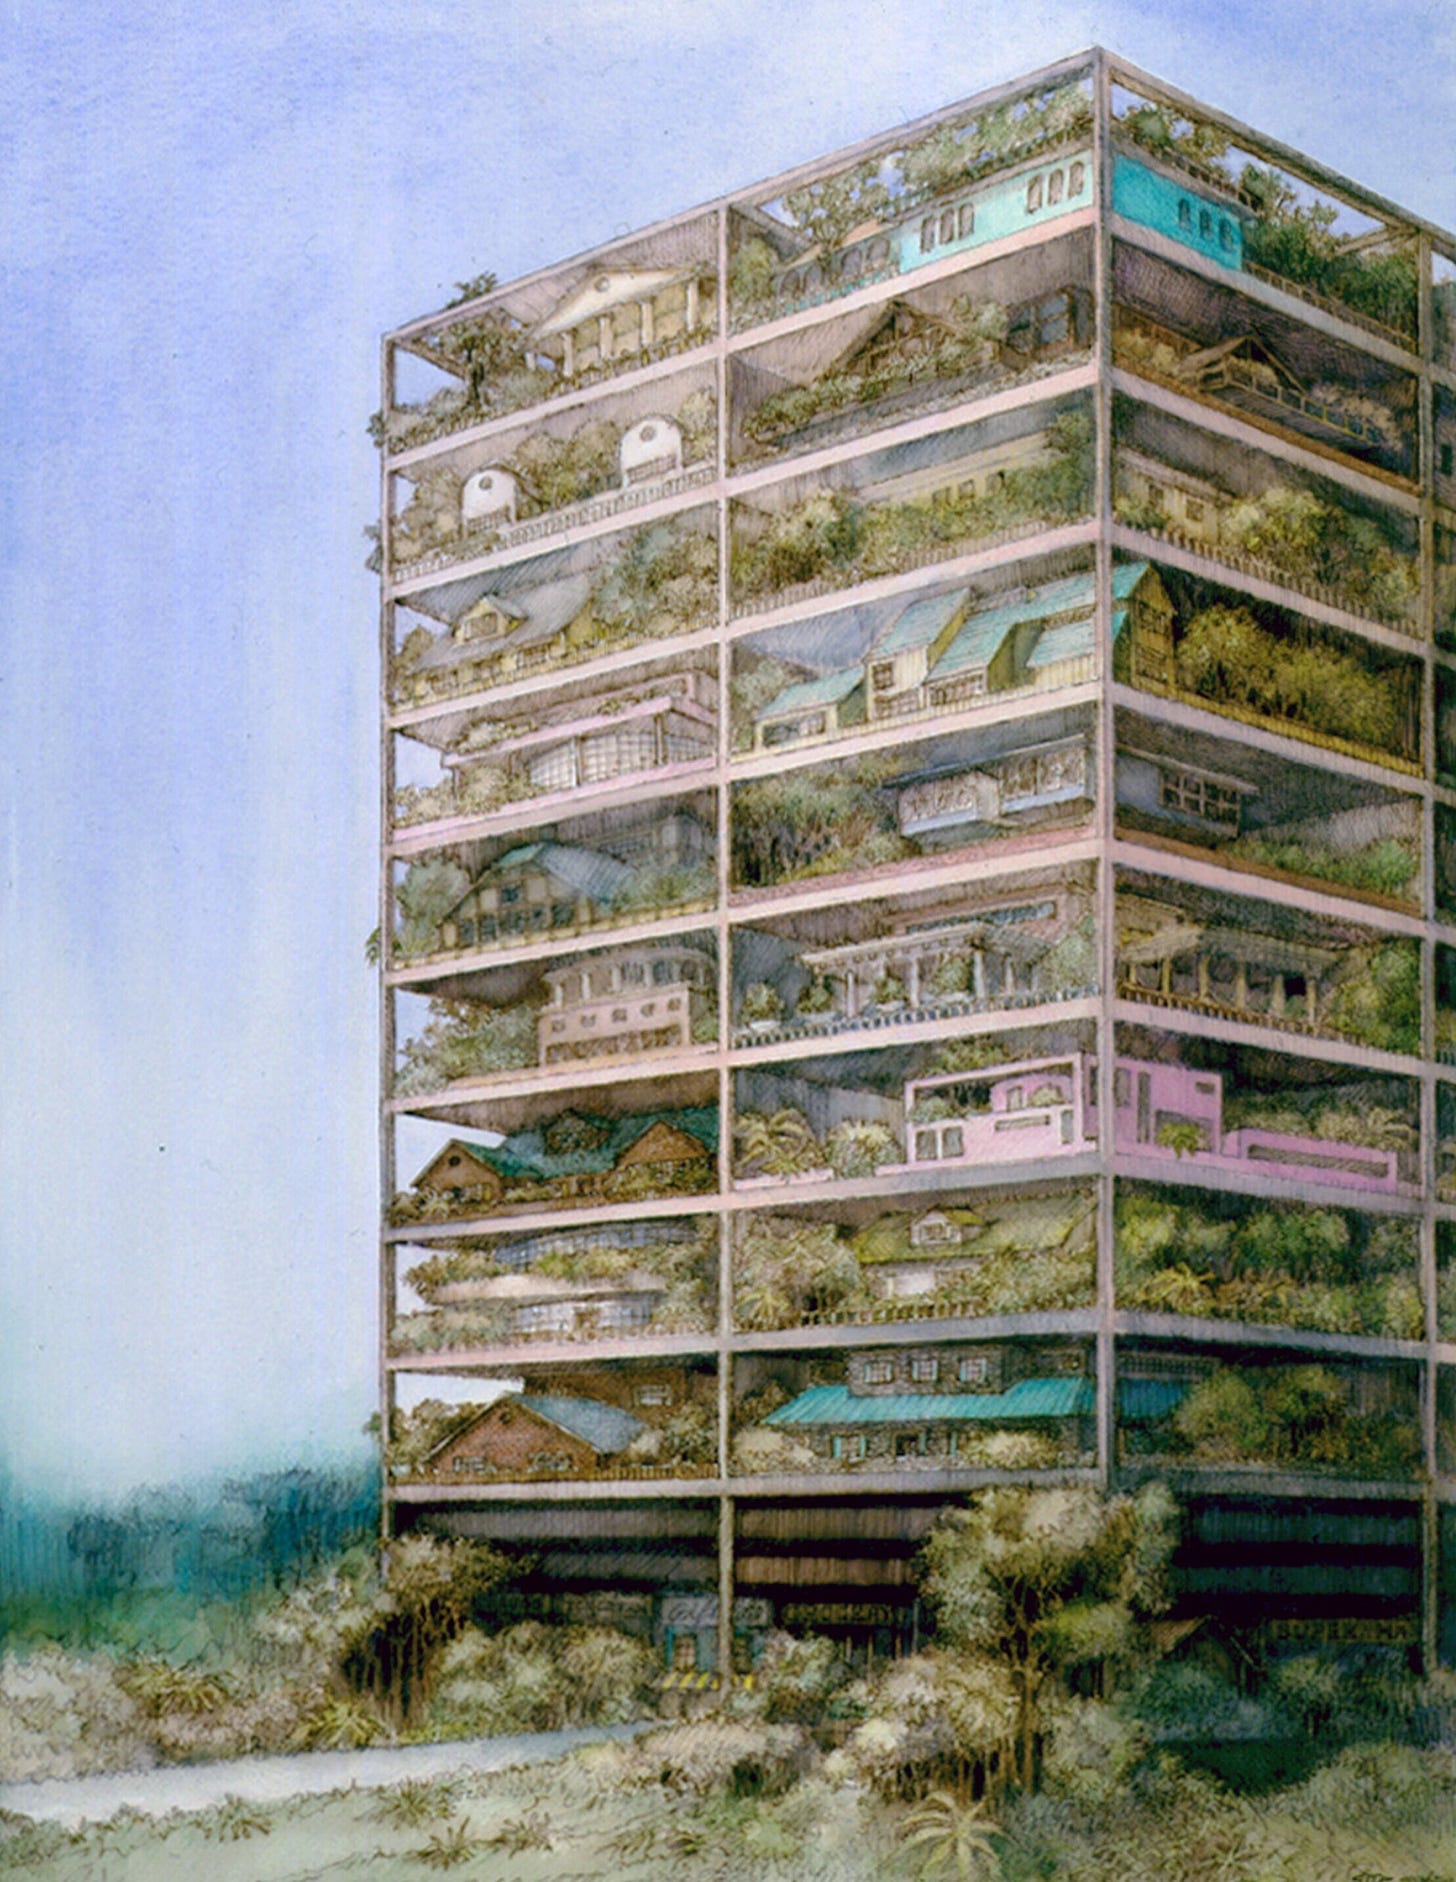 Highrise of Homes – 1981 – Color rendering by J. Wines showing a multi-story matrix that can accommodate a vertical community of private houses, clustered into distinct village-like communities on each floor.